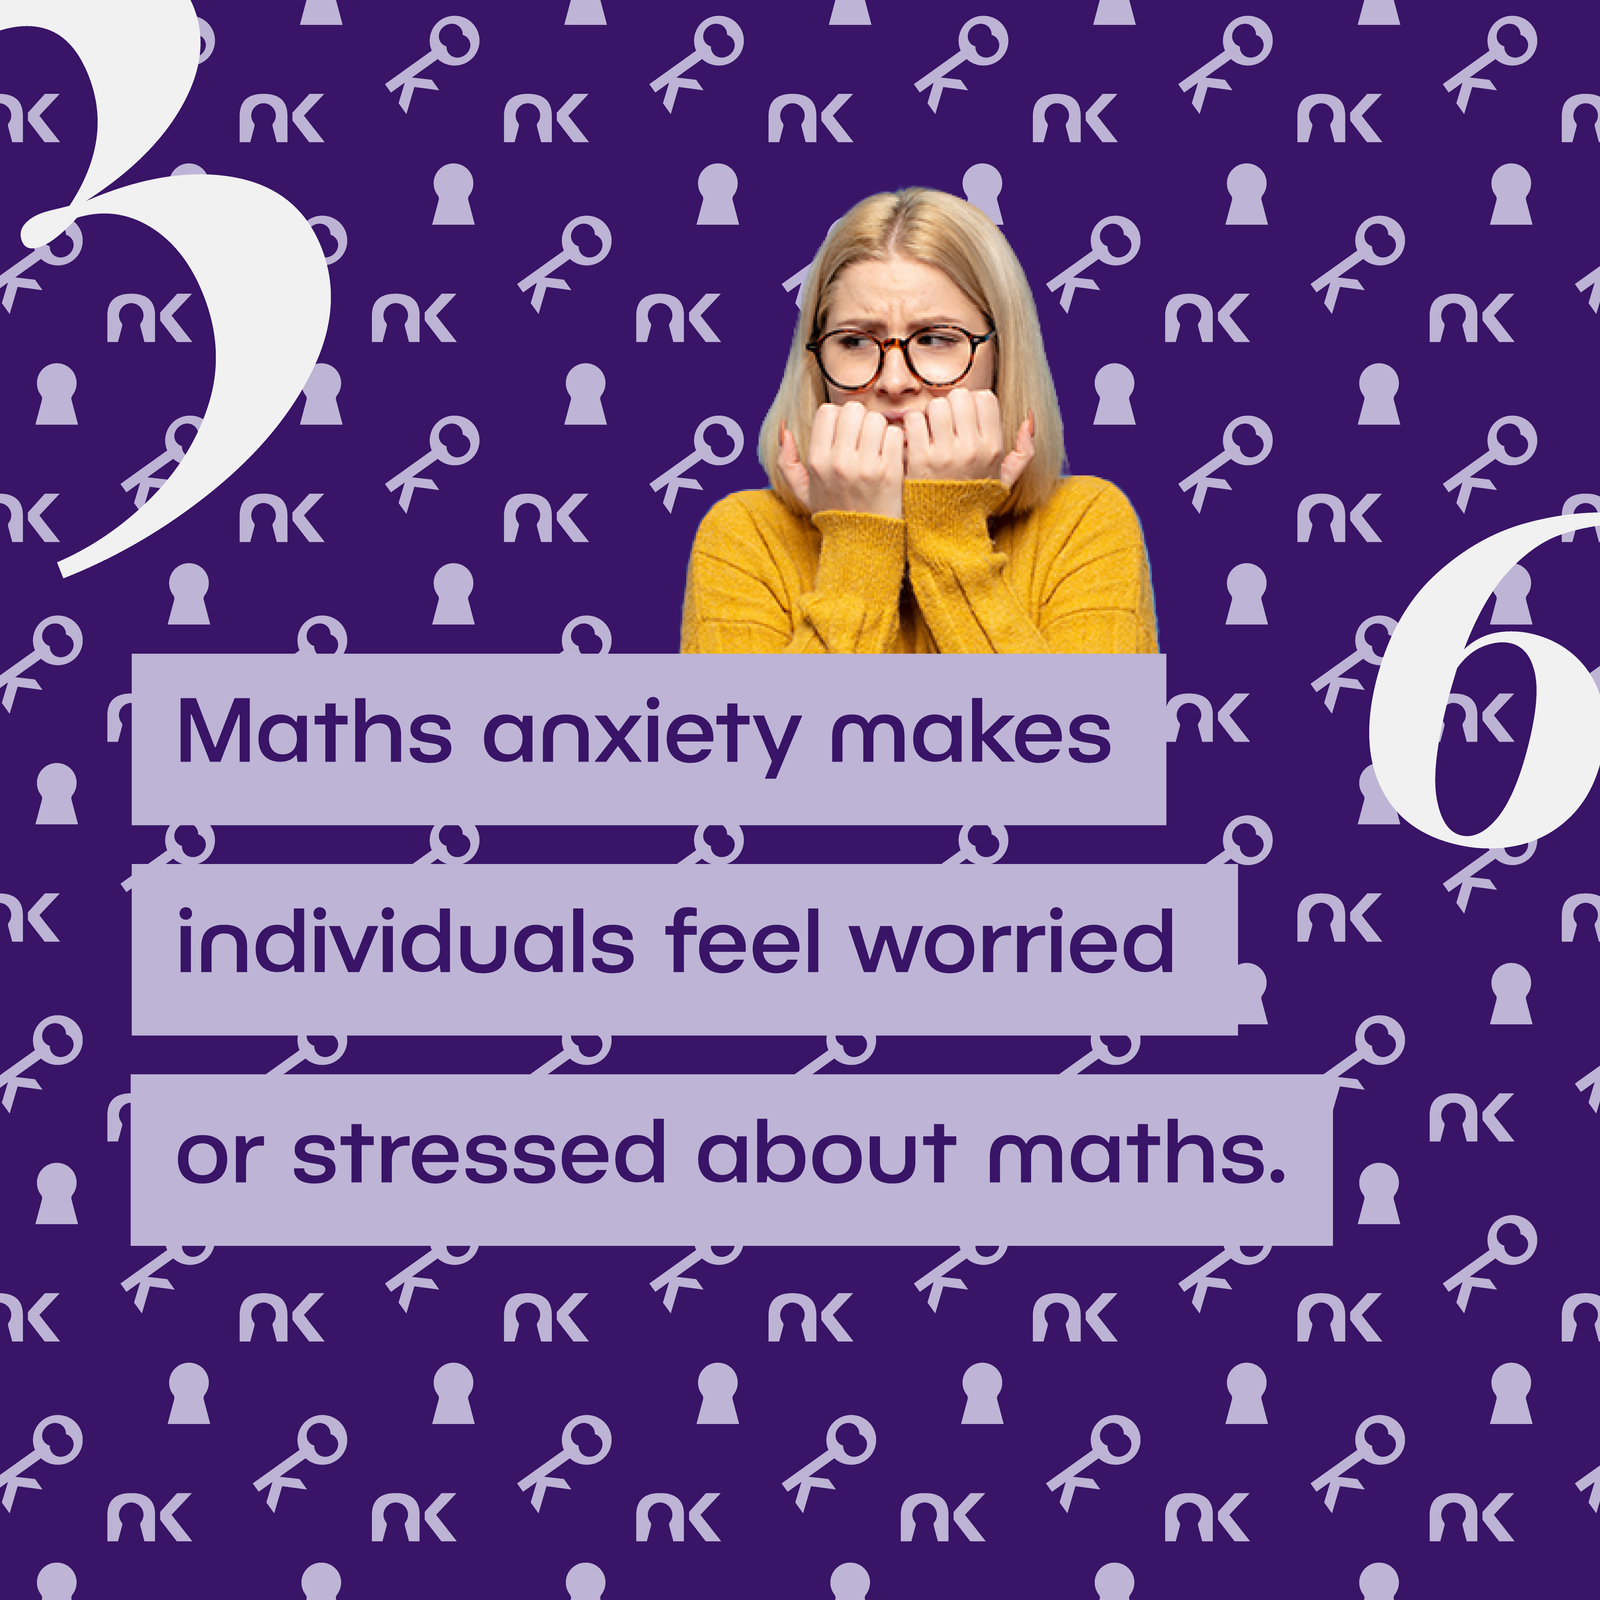 Text says: "Maths anxiety makes individuals feel worried or stressed about maths." Next to a worried-looking white woman biting her fingernails, wearing glasses and a yellow jumper.